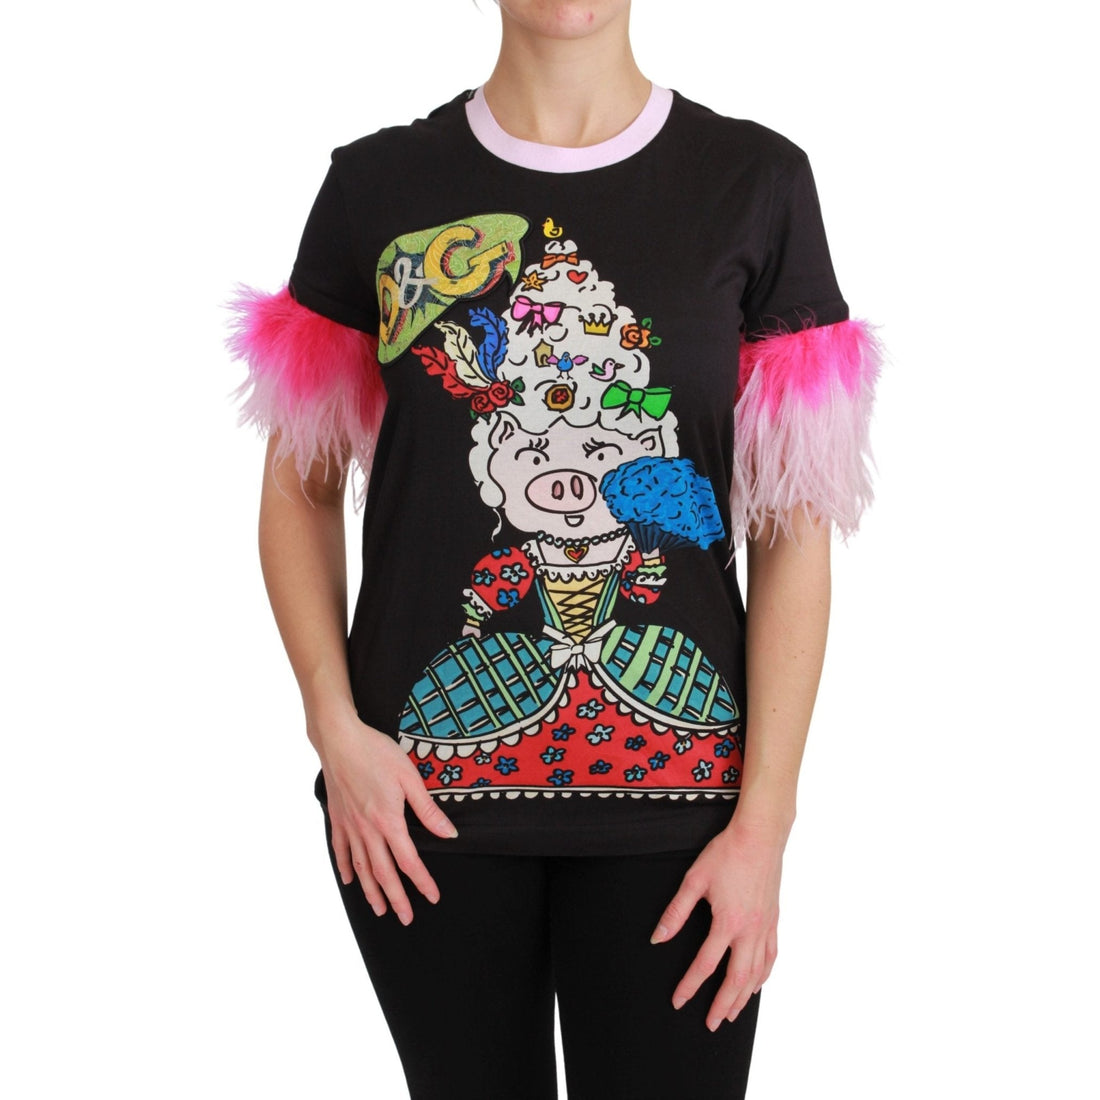 Dolce & Gabbana Black YEAR OF THE PIG Top Cotton T-shirt - Paris Deluxe